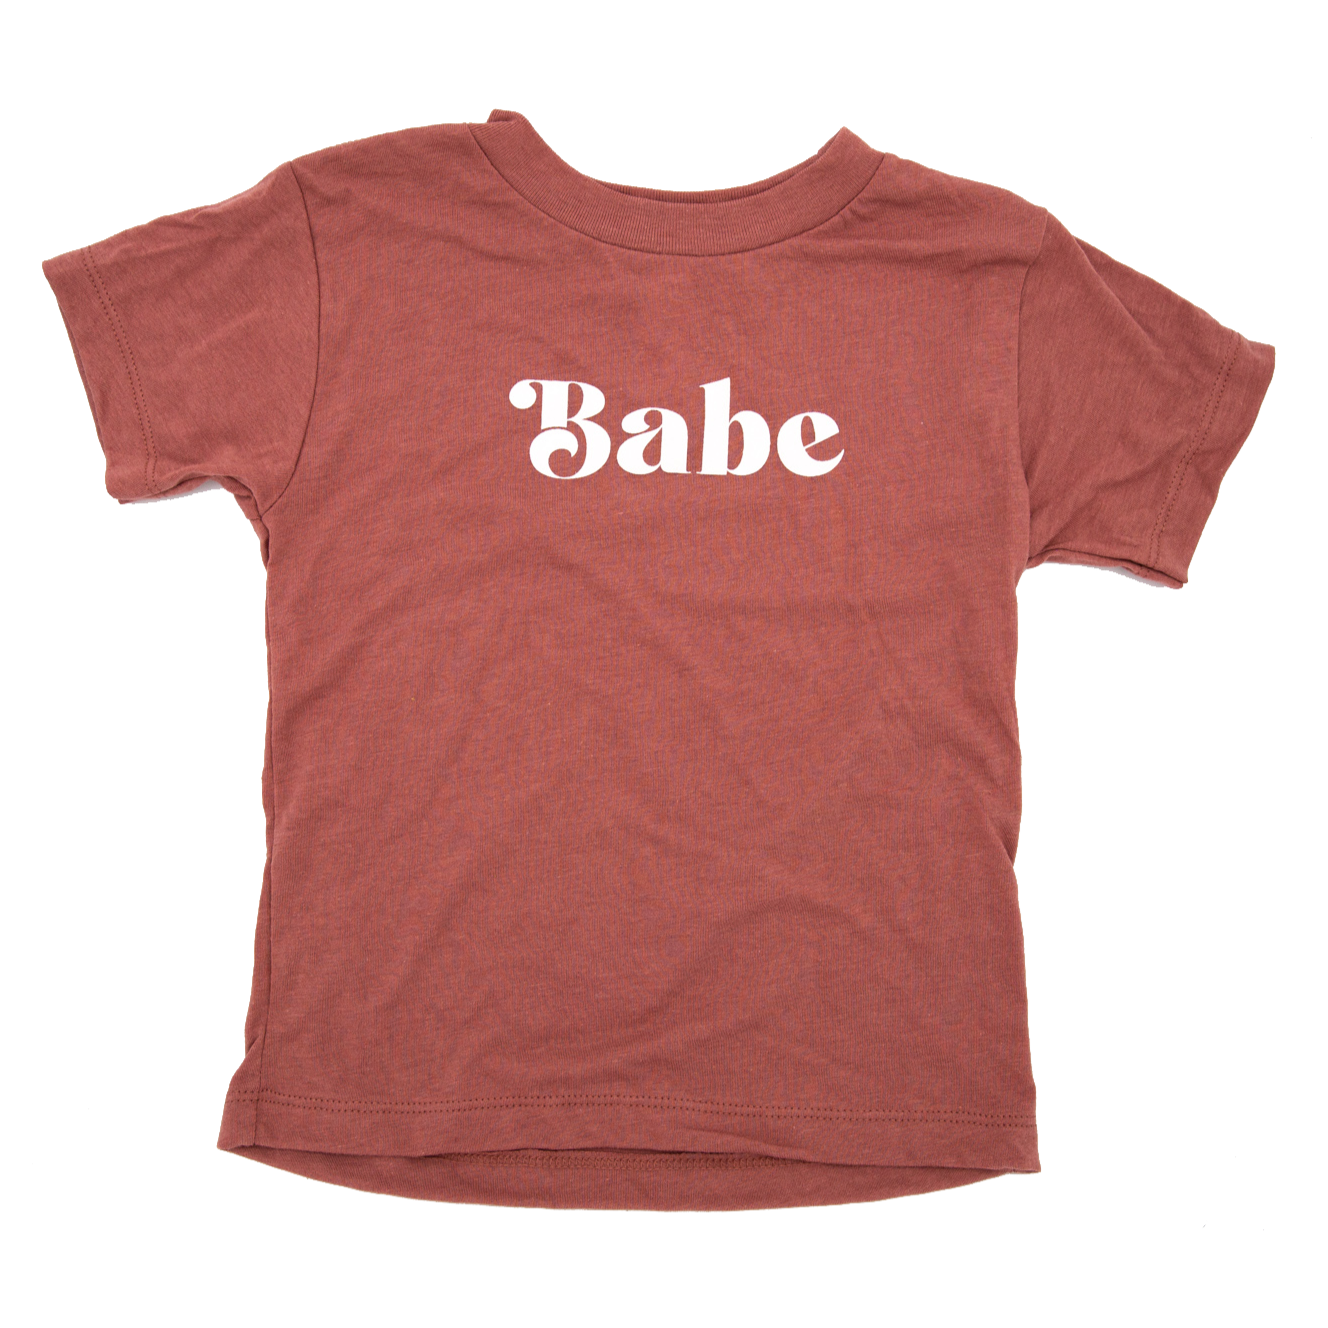 The Baby Cubby Babe Tee - Dusty Pink